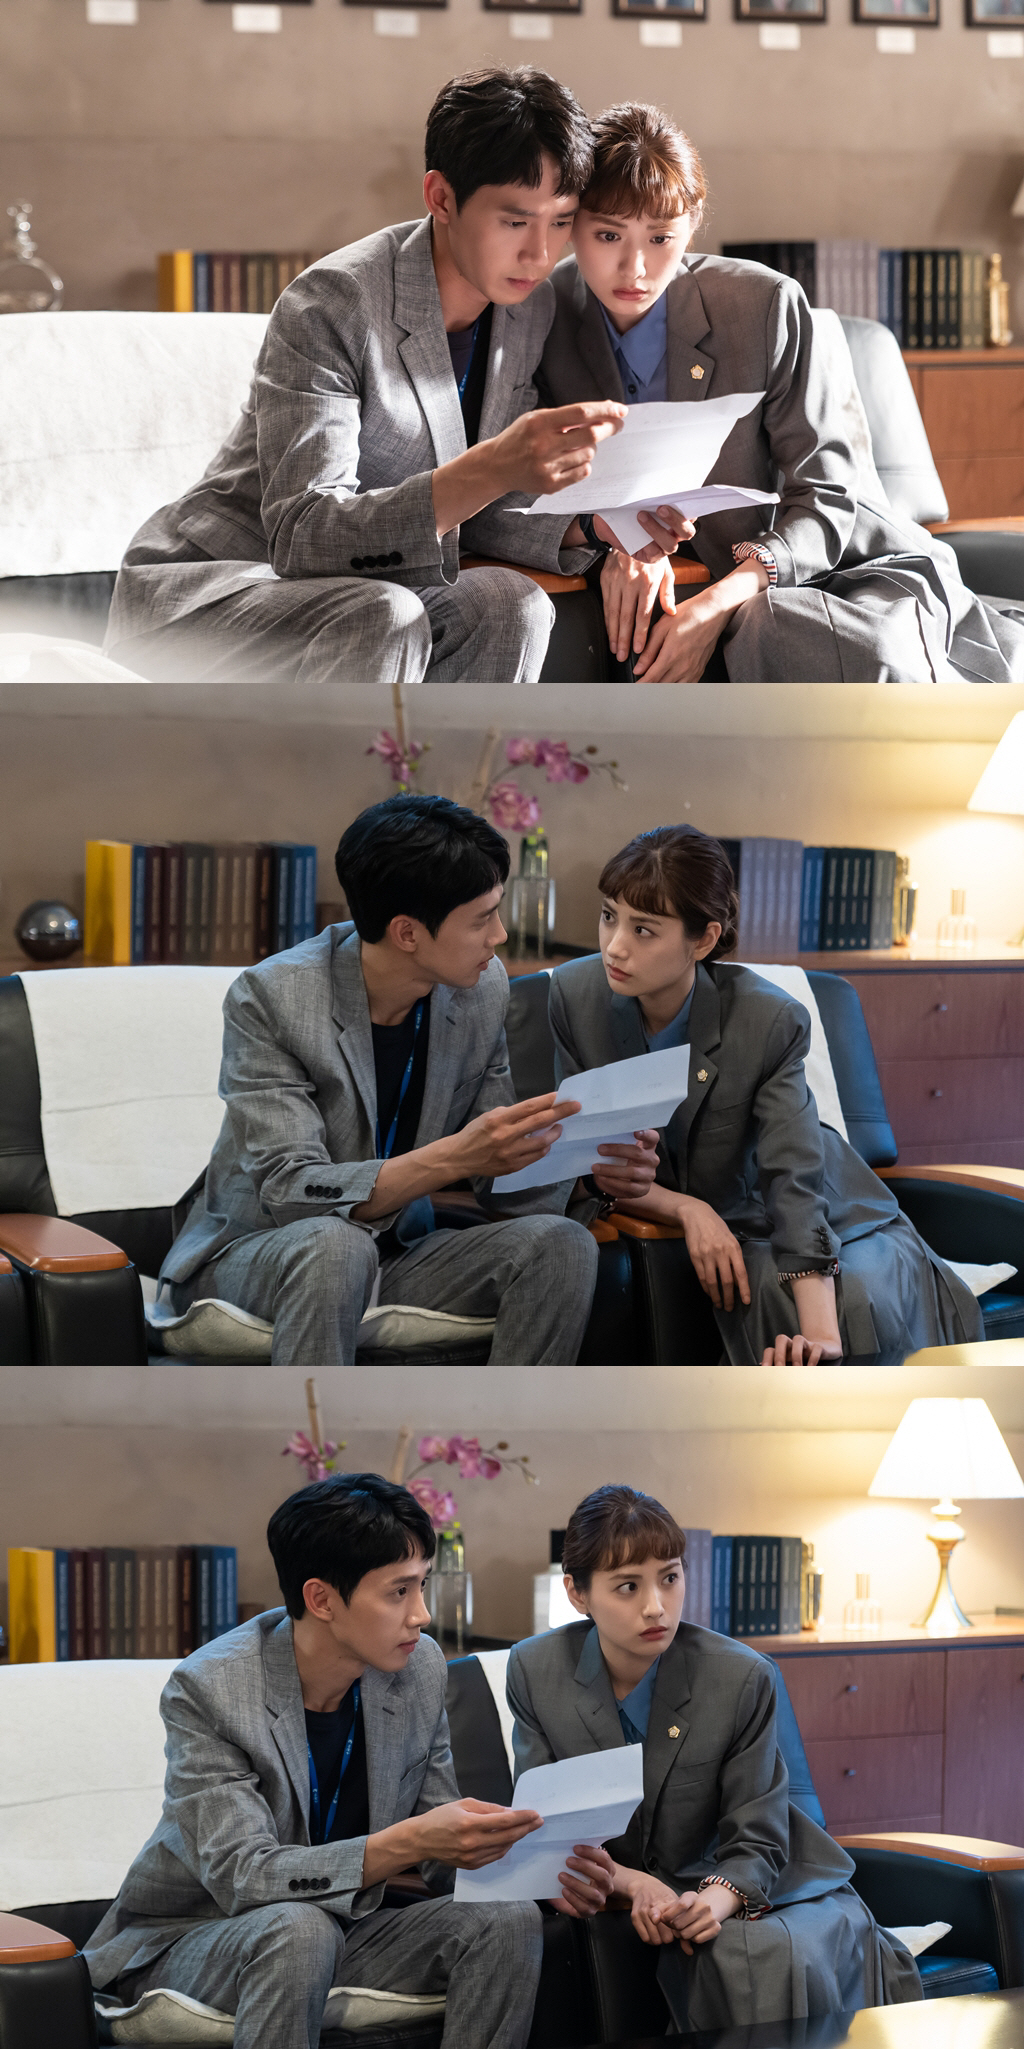 What was the surprise of Chu Shi Biao Nana and Park Sung-hoon?KBS 2TV Wednesday-Thursday evening drama Chu Shi Biao (playplayed by Moon Hyun-kyung/director Hwang Seung-ki, Choi Yeon-soo/production Celltrion Entertainment, Frame Media/hereinafter Chu Shi Biao) is running toward the second half.The former Sarah (Nana Boone), who became the chairman of the Mawon-gu council in the Buddhist Civil Service King, and the fifth-grade clerk, Park Sung-hoon, who claimed to be the former secretary of the Sarah.The two main characters, who are running with work and love, are pouring hot support from enthusiastic viewers.As Sarah was elected chairman and Seo Gong-myeong became his assistant, they had overcome various crises together.Two people who have no power or no back in the power to hold the local political plate are doing politics for the real residents.It is like a fantasy, but the efforts of the two people who do their best burst into a cool cider.On August 12, the production team of Chu Shi Biao will reveal the meaningful appearance of Sarah and Seo Gong-myeong.The released photo captures one scene on the 13th episode of Chu Shi Biao which is broadcast today (12th).Sarah and Seogong are sitting side by side in the chair of the chair of the former Sarahs office, looking at some papers together.What the hell was in the dossier, the former Sarah and the Srong name, were surprised.There is a sense of embarrassment in the eyes and facial expressions of two people looking at the documents, seeing each other, and looking at someone else alternately.Earlier, Sarah and Seo Gong-myeong found out that they were not clear in the Smart One City project that Won So-jeong (Bae Hae-sun) and Patriotic Conservative Party Cho Myeong-deok (Guidelines) have been pushing for their own interests.Smart One City 6 construction worker was in a crash, and the construction of the area was commissioned by an illegal company.In addition, Sarah and Seogongmyeong found that the memorial service for the victims of the Love Resort fire accident, in which Seogongmyeongs brother died in the past, was left with garbage.It is also related to the painful past of the name of the city, and it is also revealed that the former Sarah and the name of the city are beginning to dig into the corruption of the original city that promoted Smart One City.With the two men expected to fight back in earnest, the two men were surprised.Why was Sarah and the name of the West so surprised? What was in the papers they were looking at?What would this be like for Sarah and Seogongmyeong to be in?KBS 2TV Wednesday-Thursday Evening drama Chu Shi Biao 13th will be broadcast today (12th) Wednesday night at 9:30 pm.